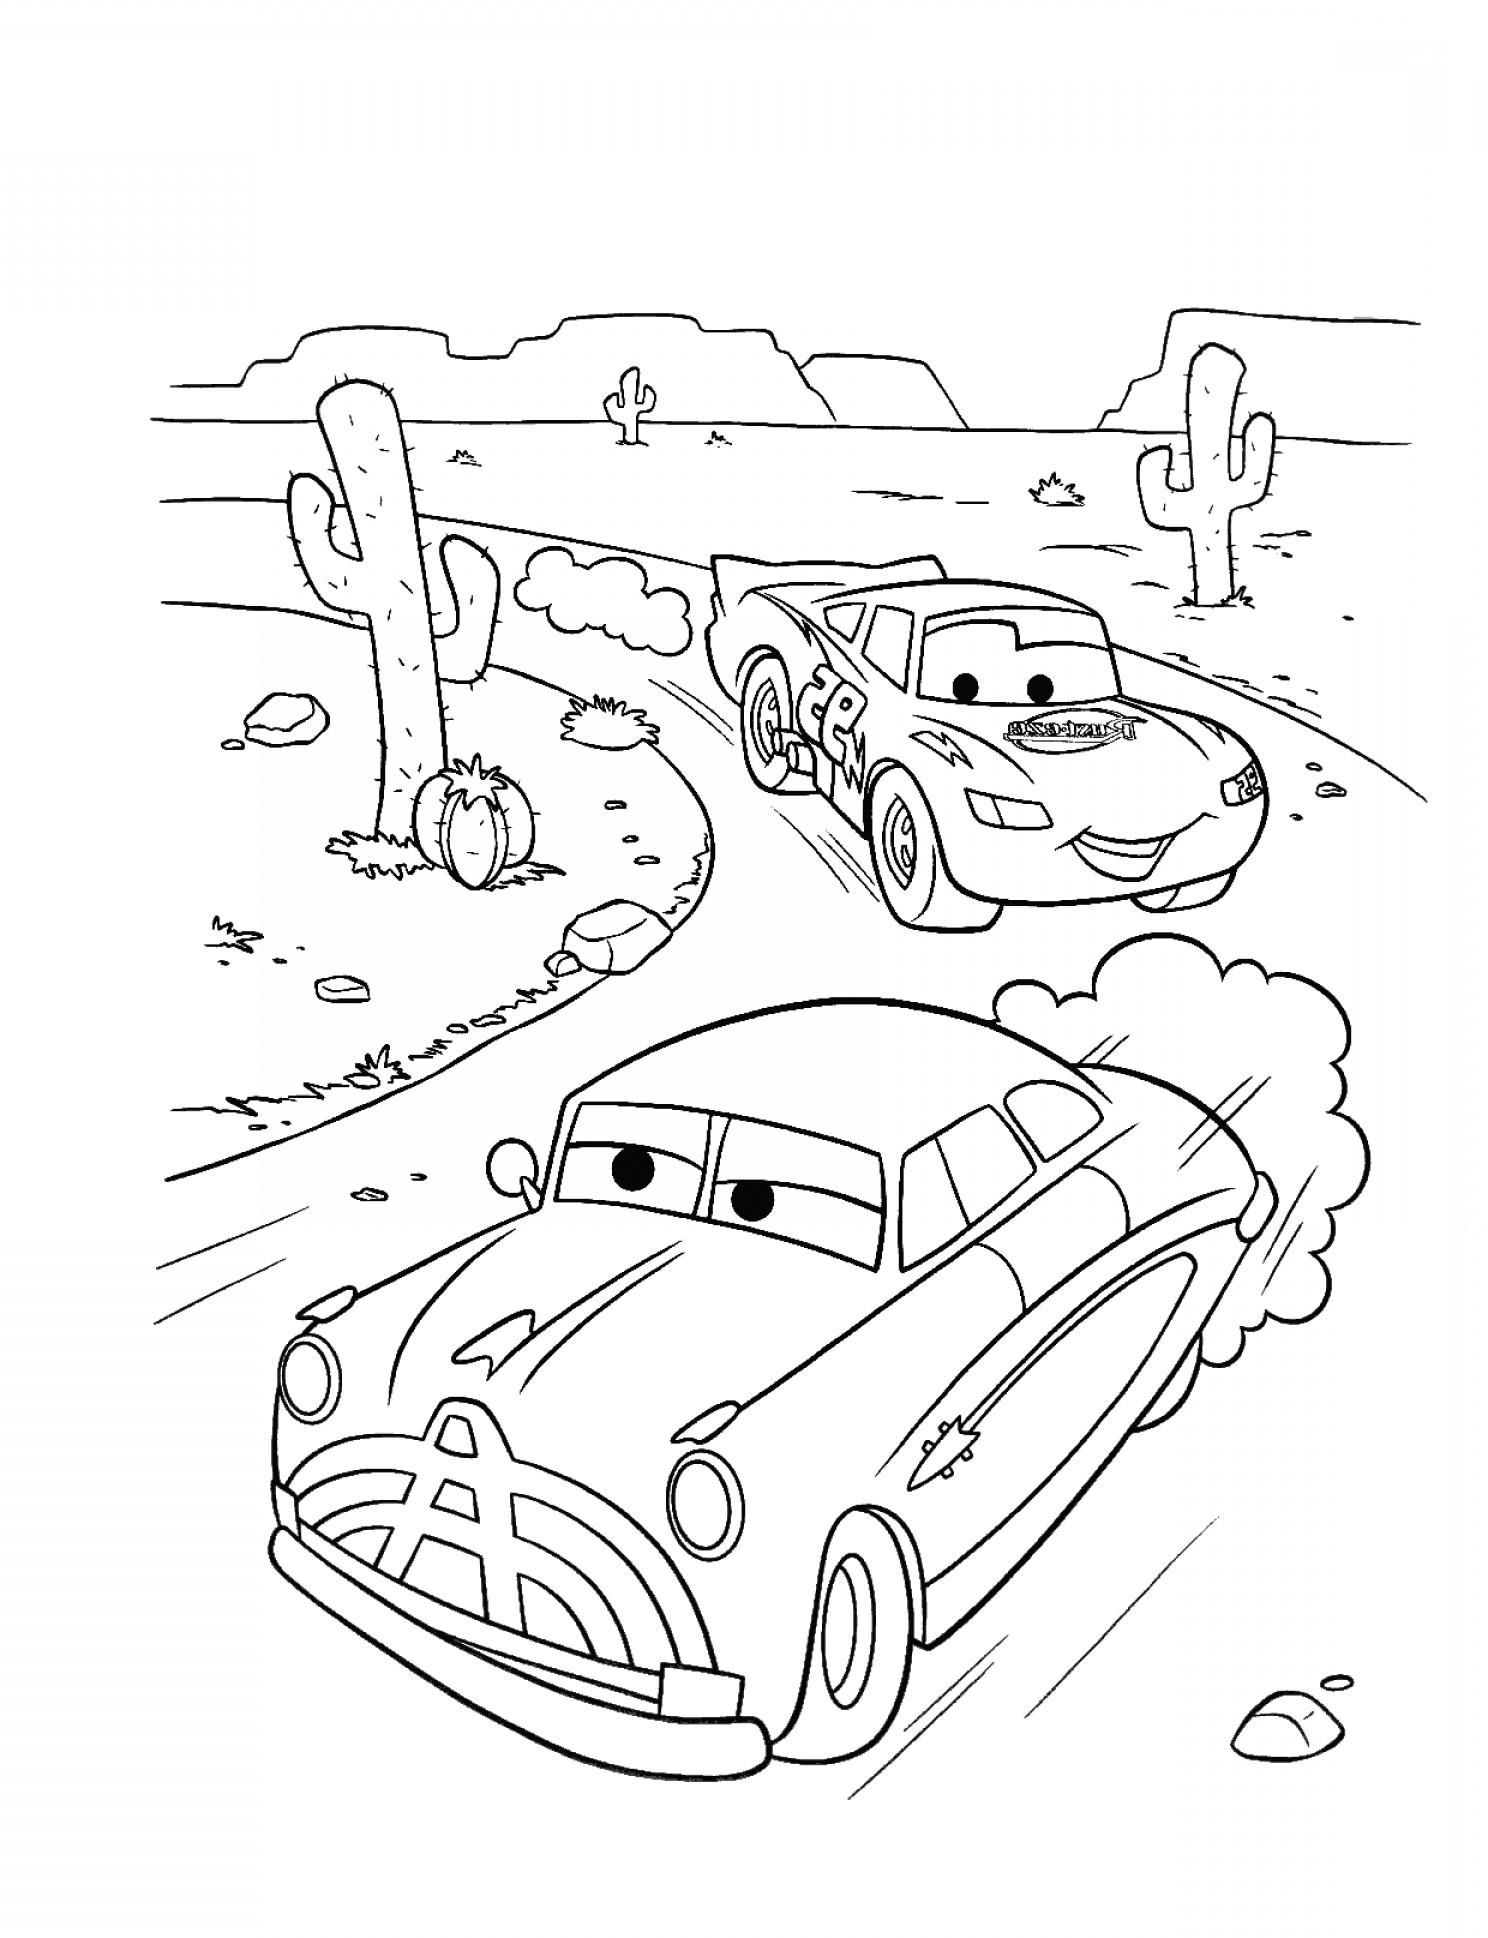 Coloring Page Of A Race Car Refundable Free Disney Cars Coloring Pages To Print Lightning